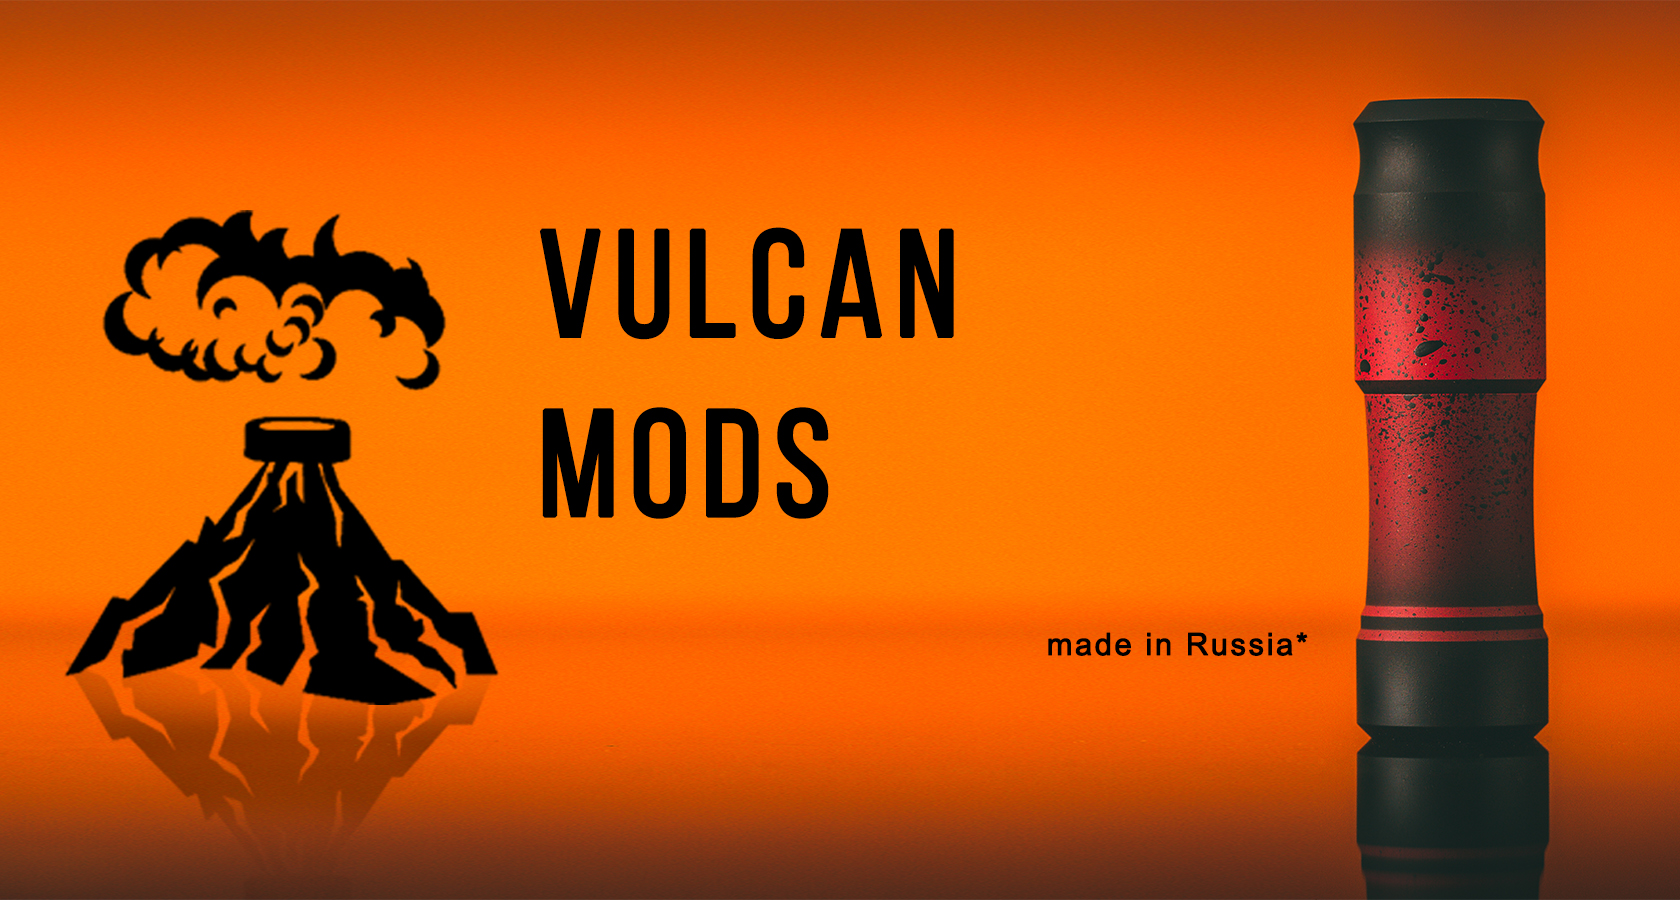 This one was the last of us. The Vulkan Mod to protect the